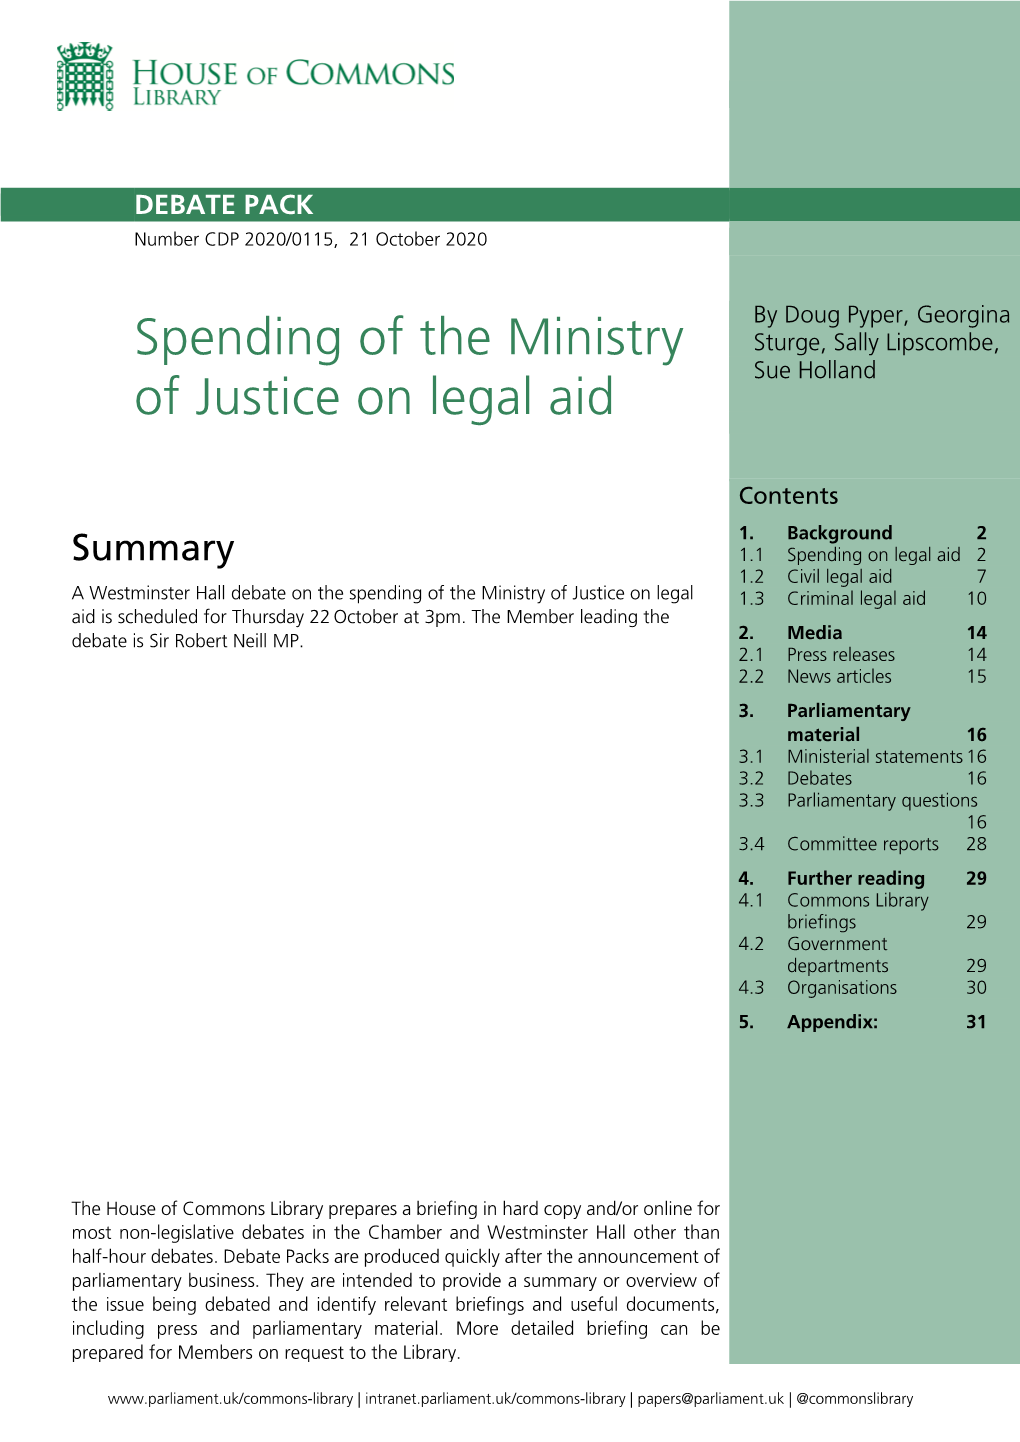 Spending of the Ministry of Justice on Legal 1.3 Criminal Legal Aid 10 Aid Is Scheduled for Thursday 22 October at 3Pm